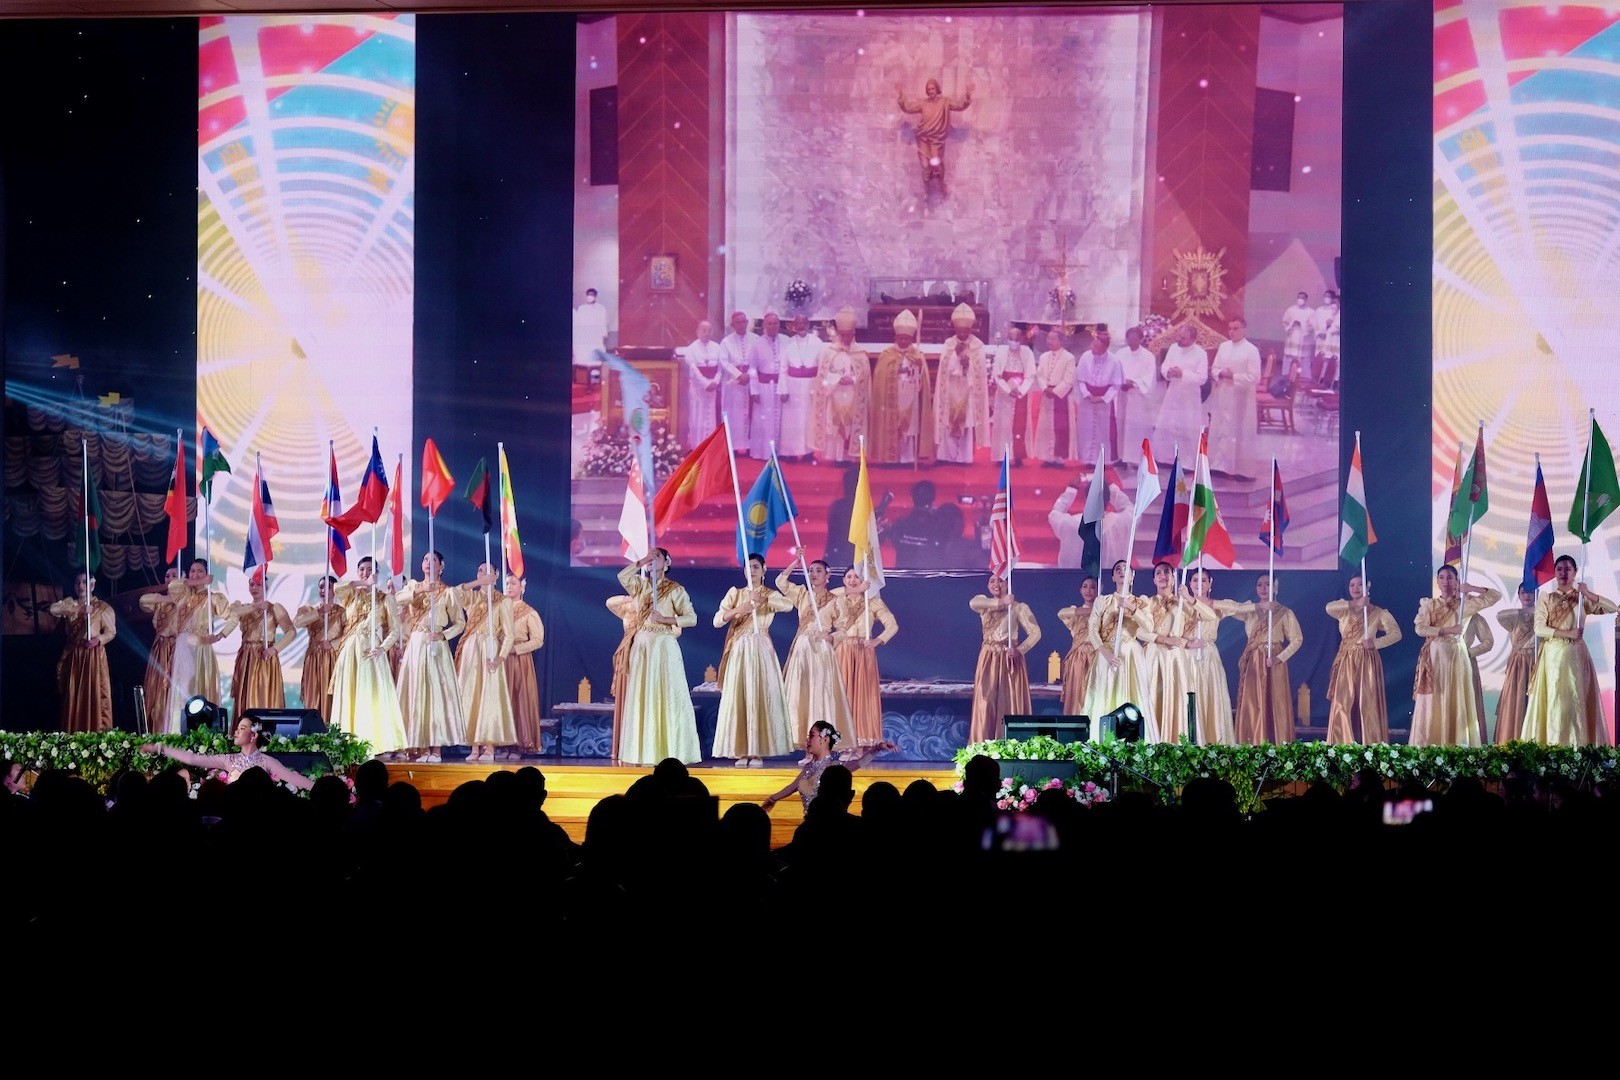 Thai youth welcome Asian bishops with spectacular show